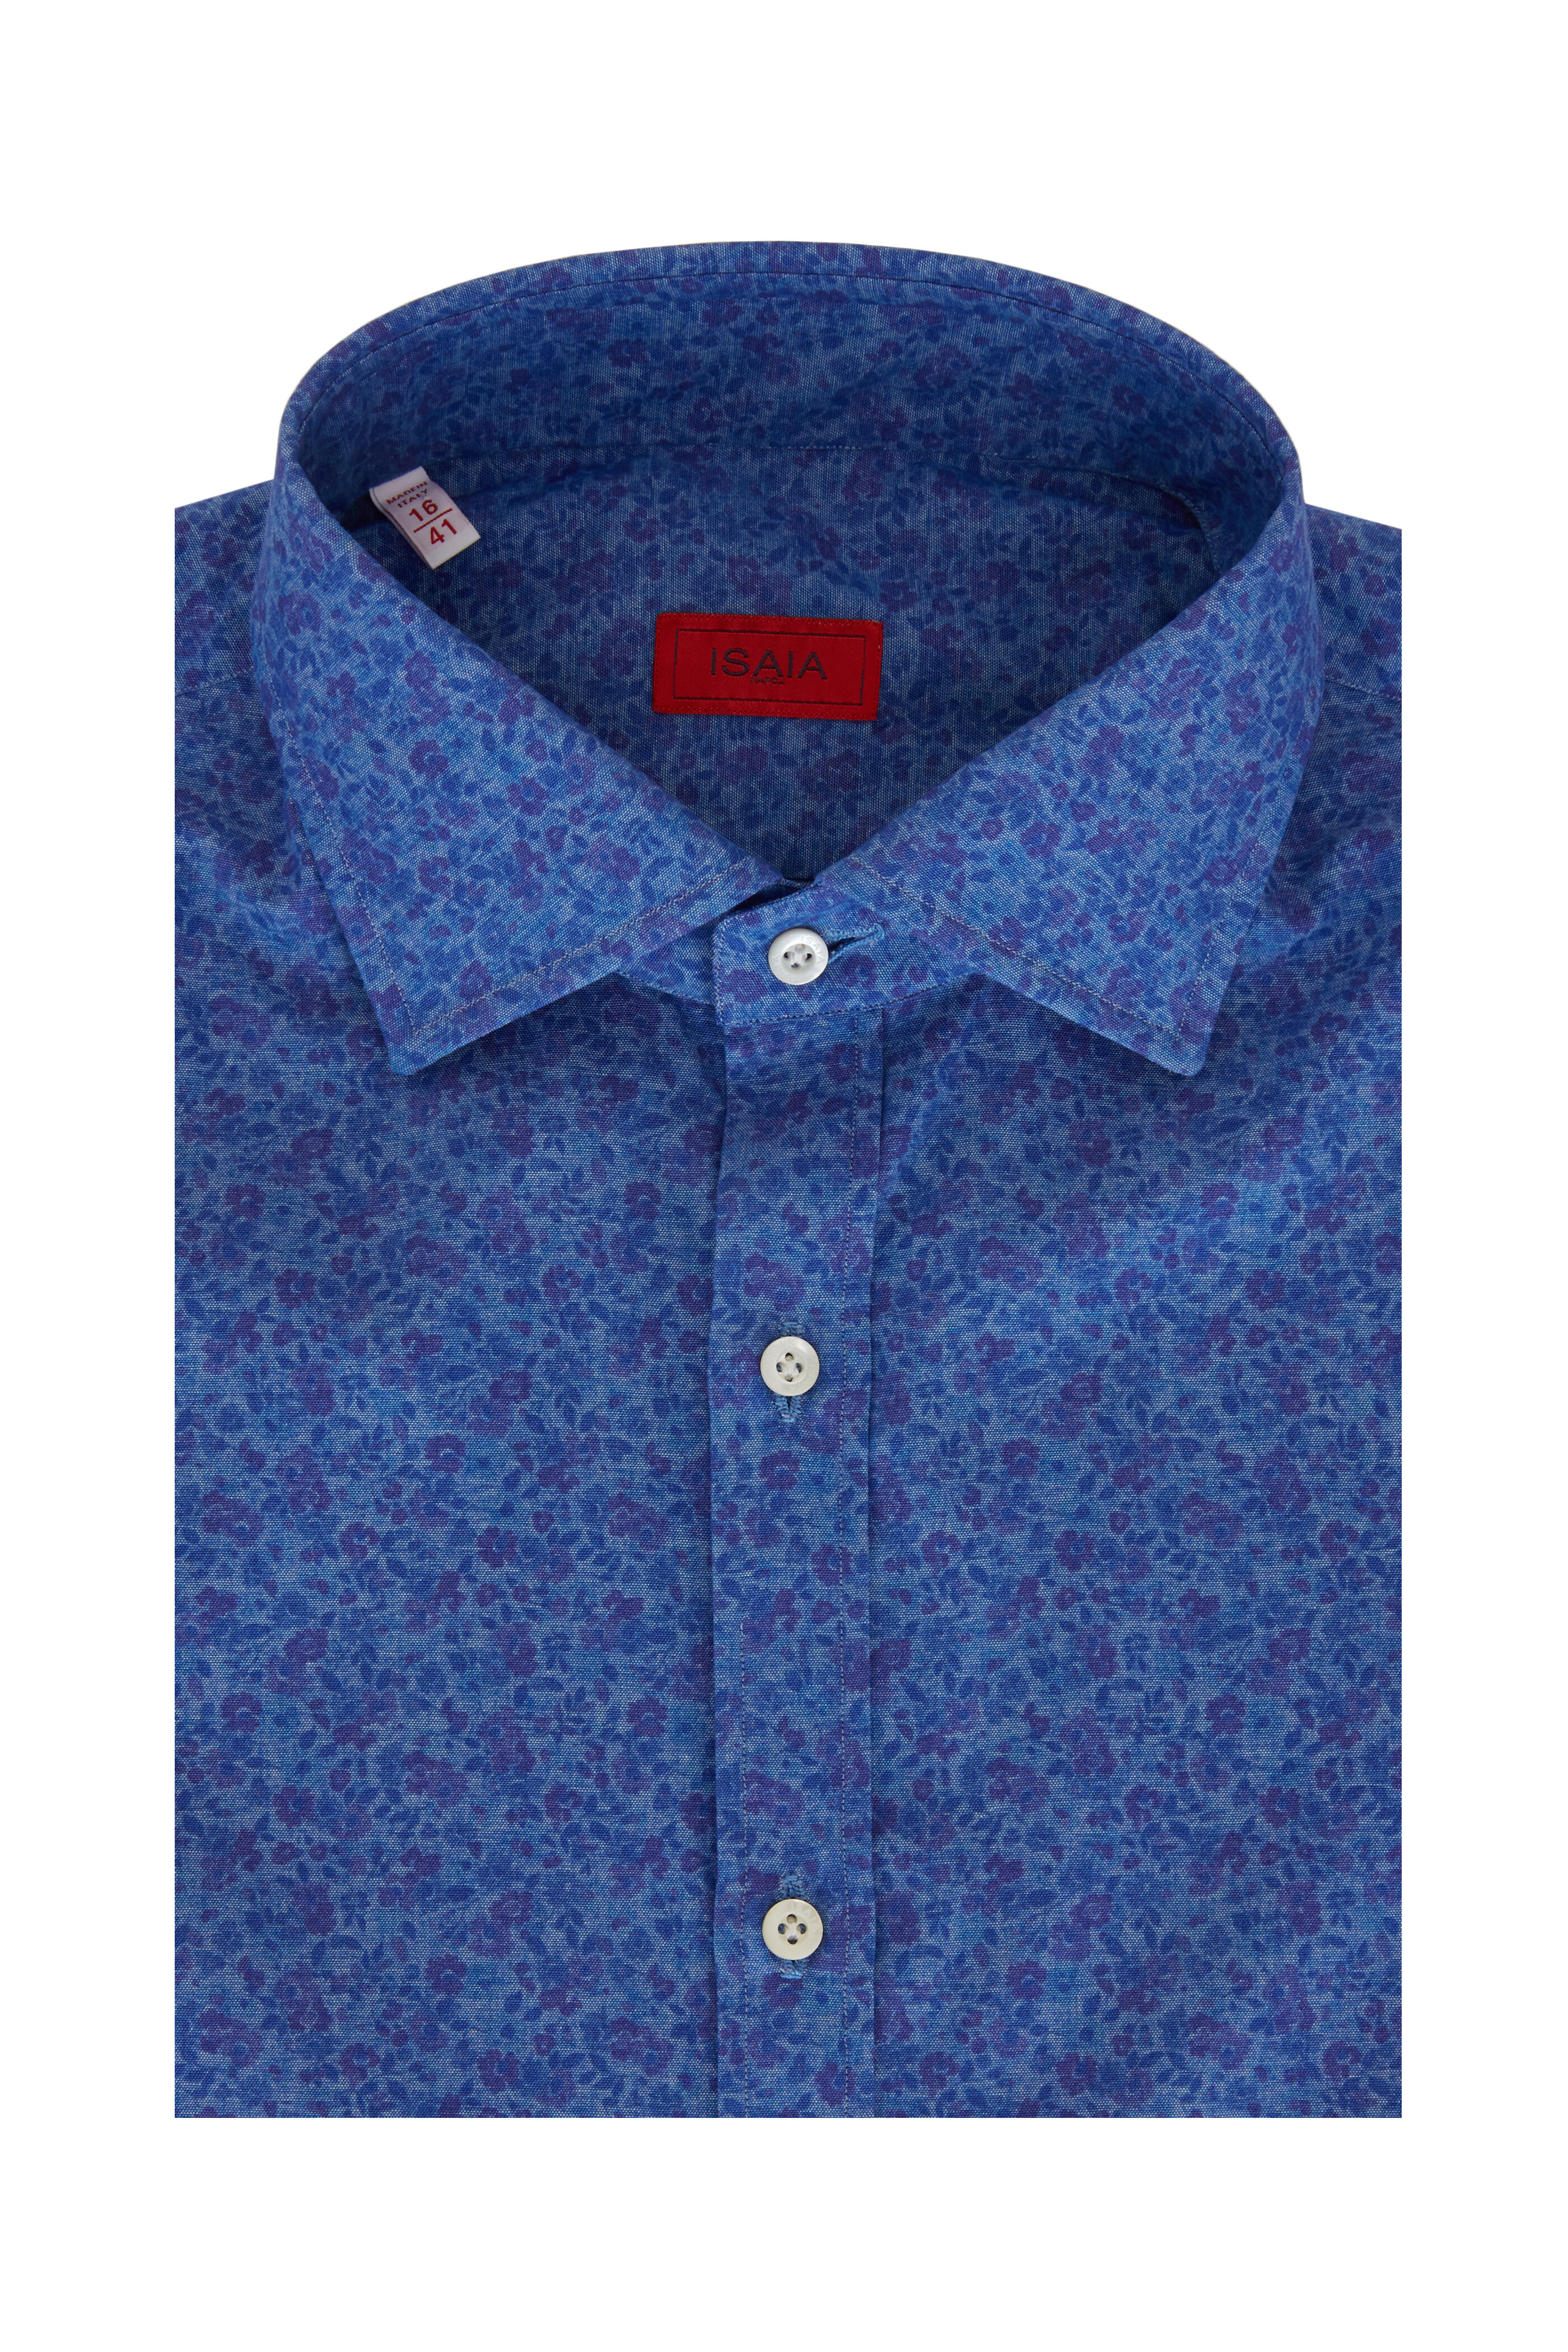 Isaia - Blue & Purple Floral Print Sport Shirt | Mitchell Stores